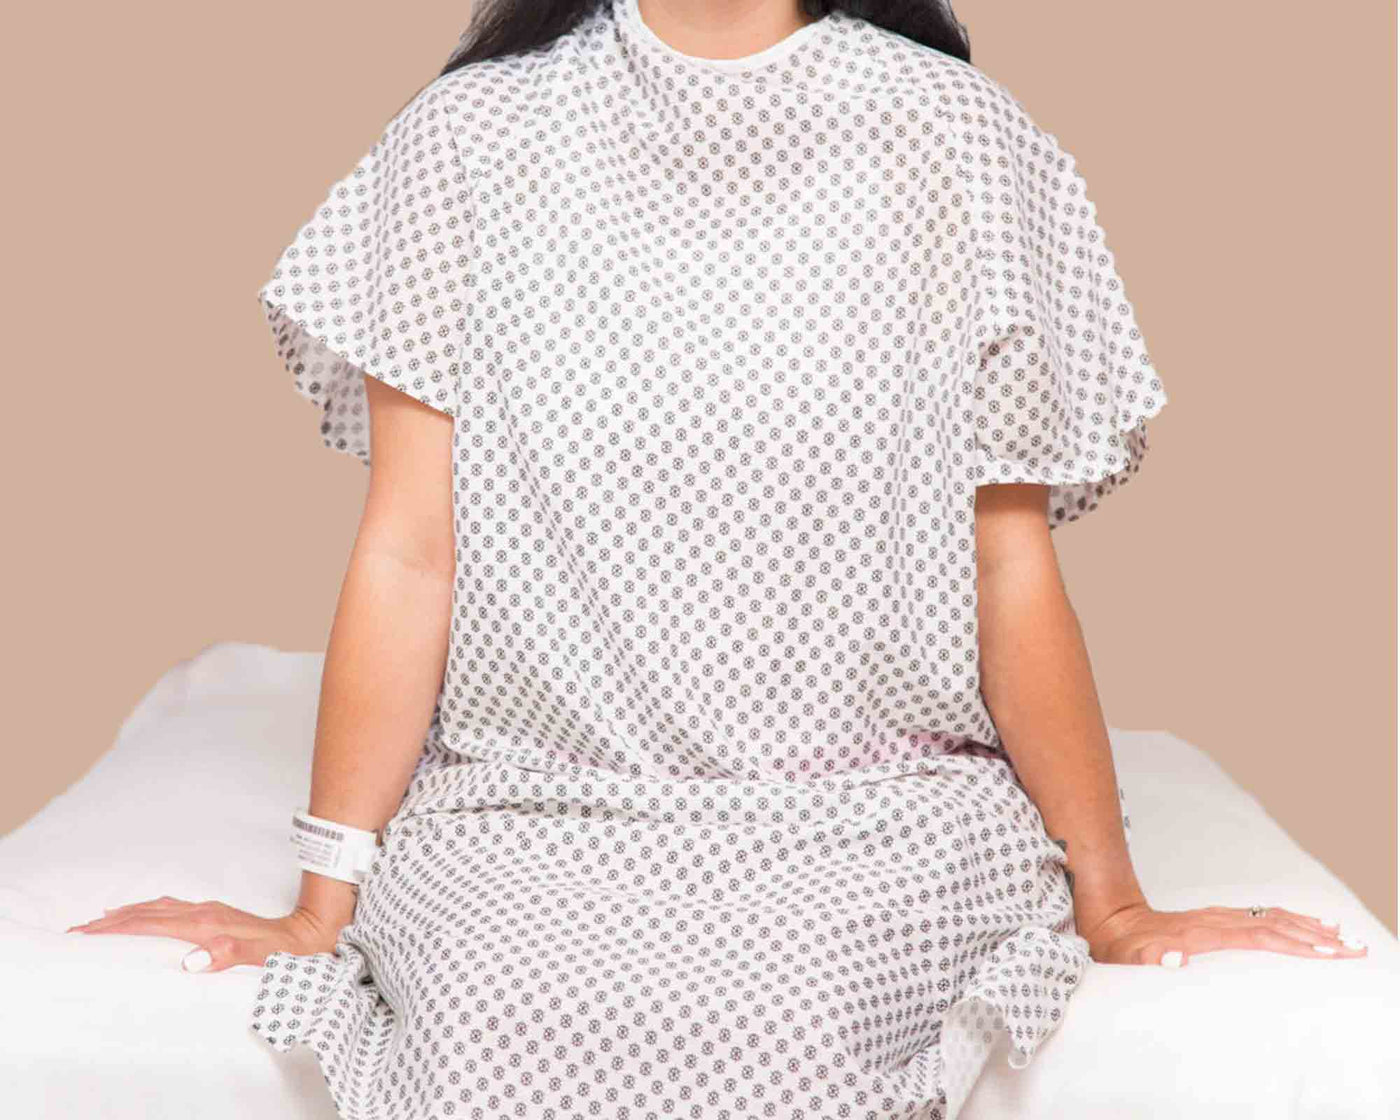 A woman wearing a snowflake pattern hospital patient gown